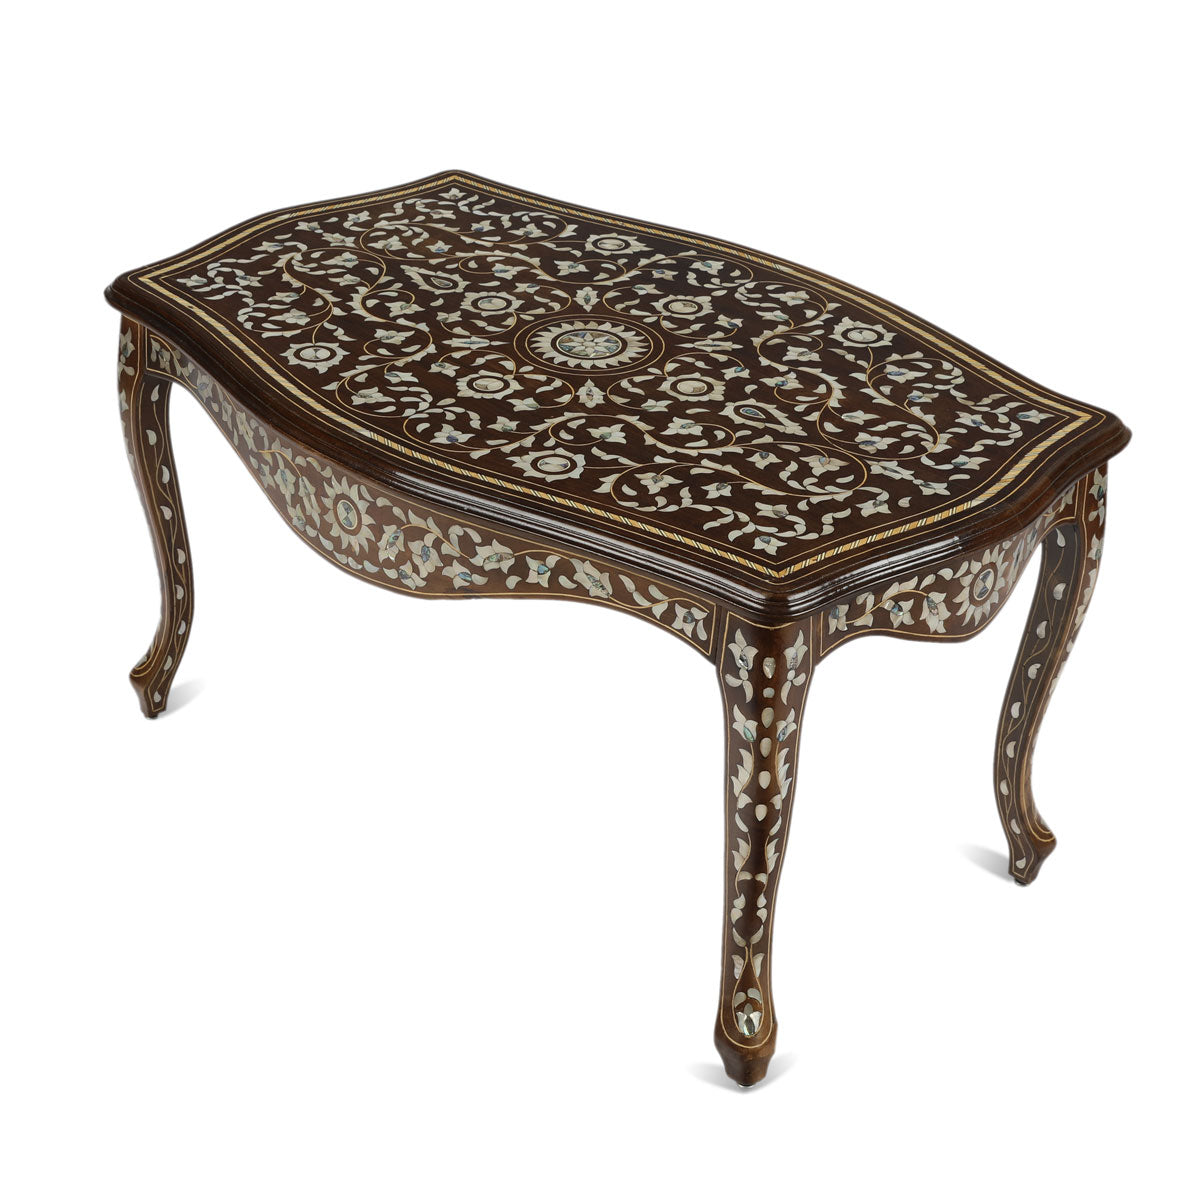 Top Angled Side View of Mother of Pearl Ornamented Coffee Table